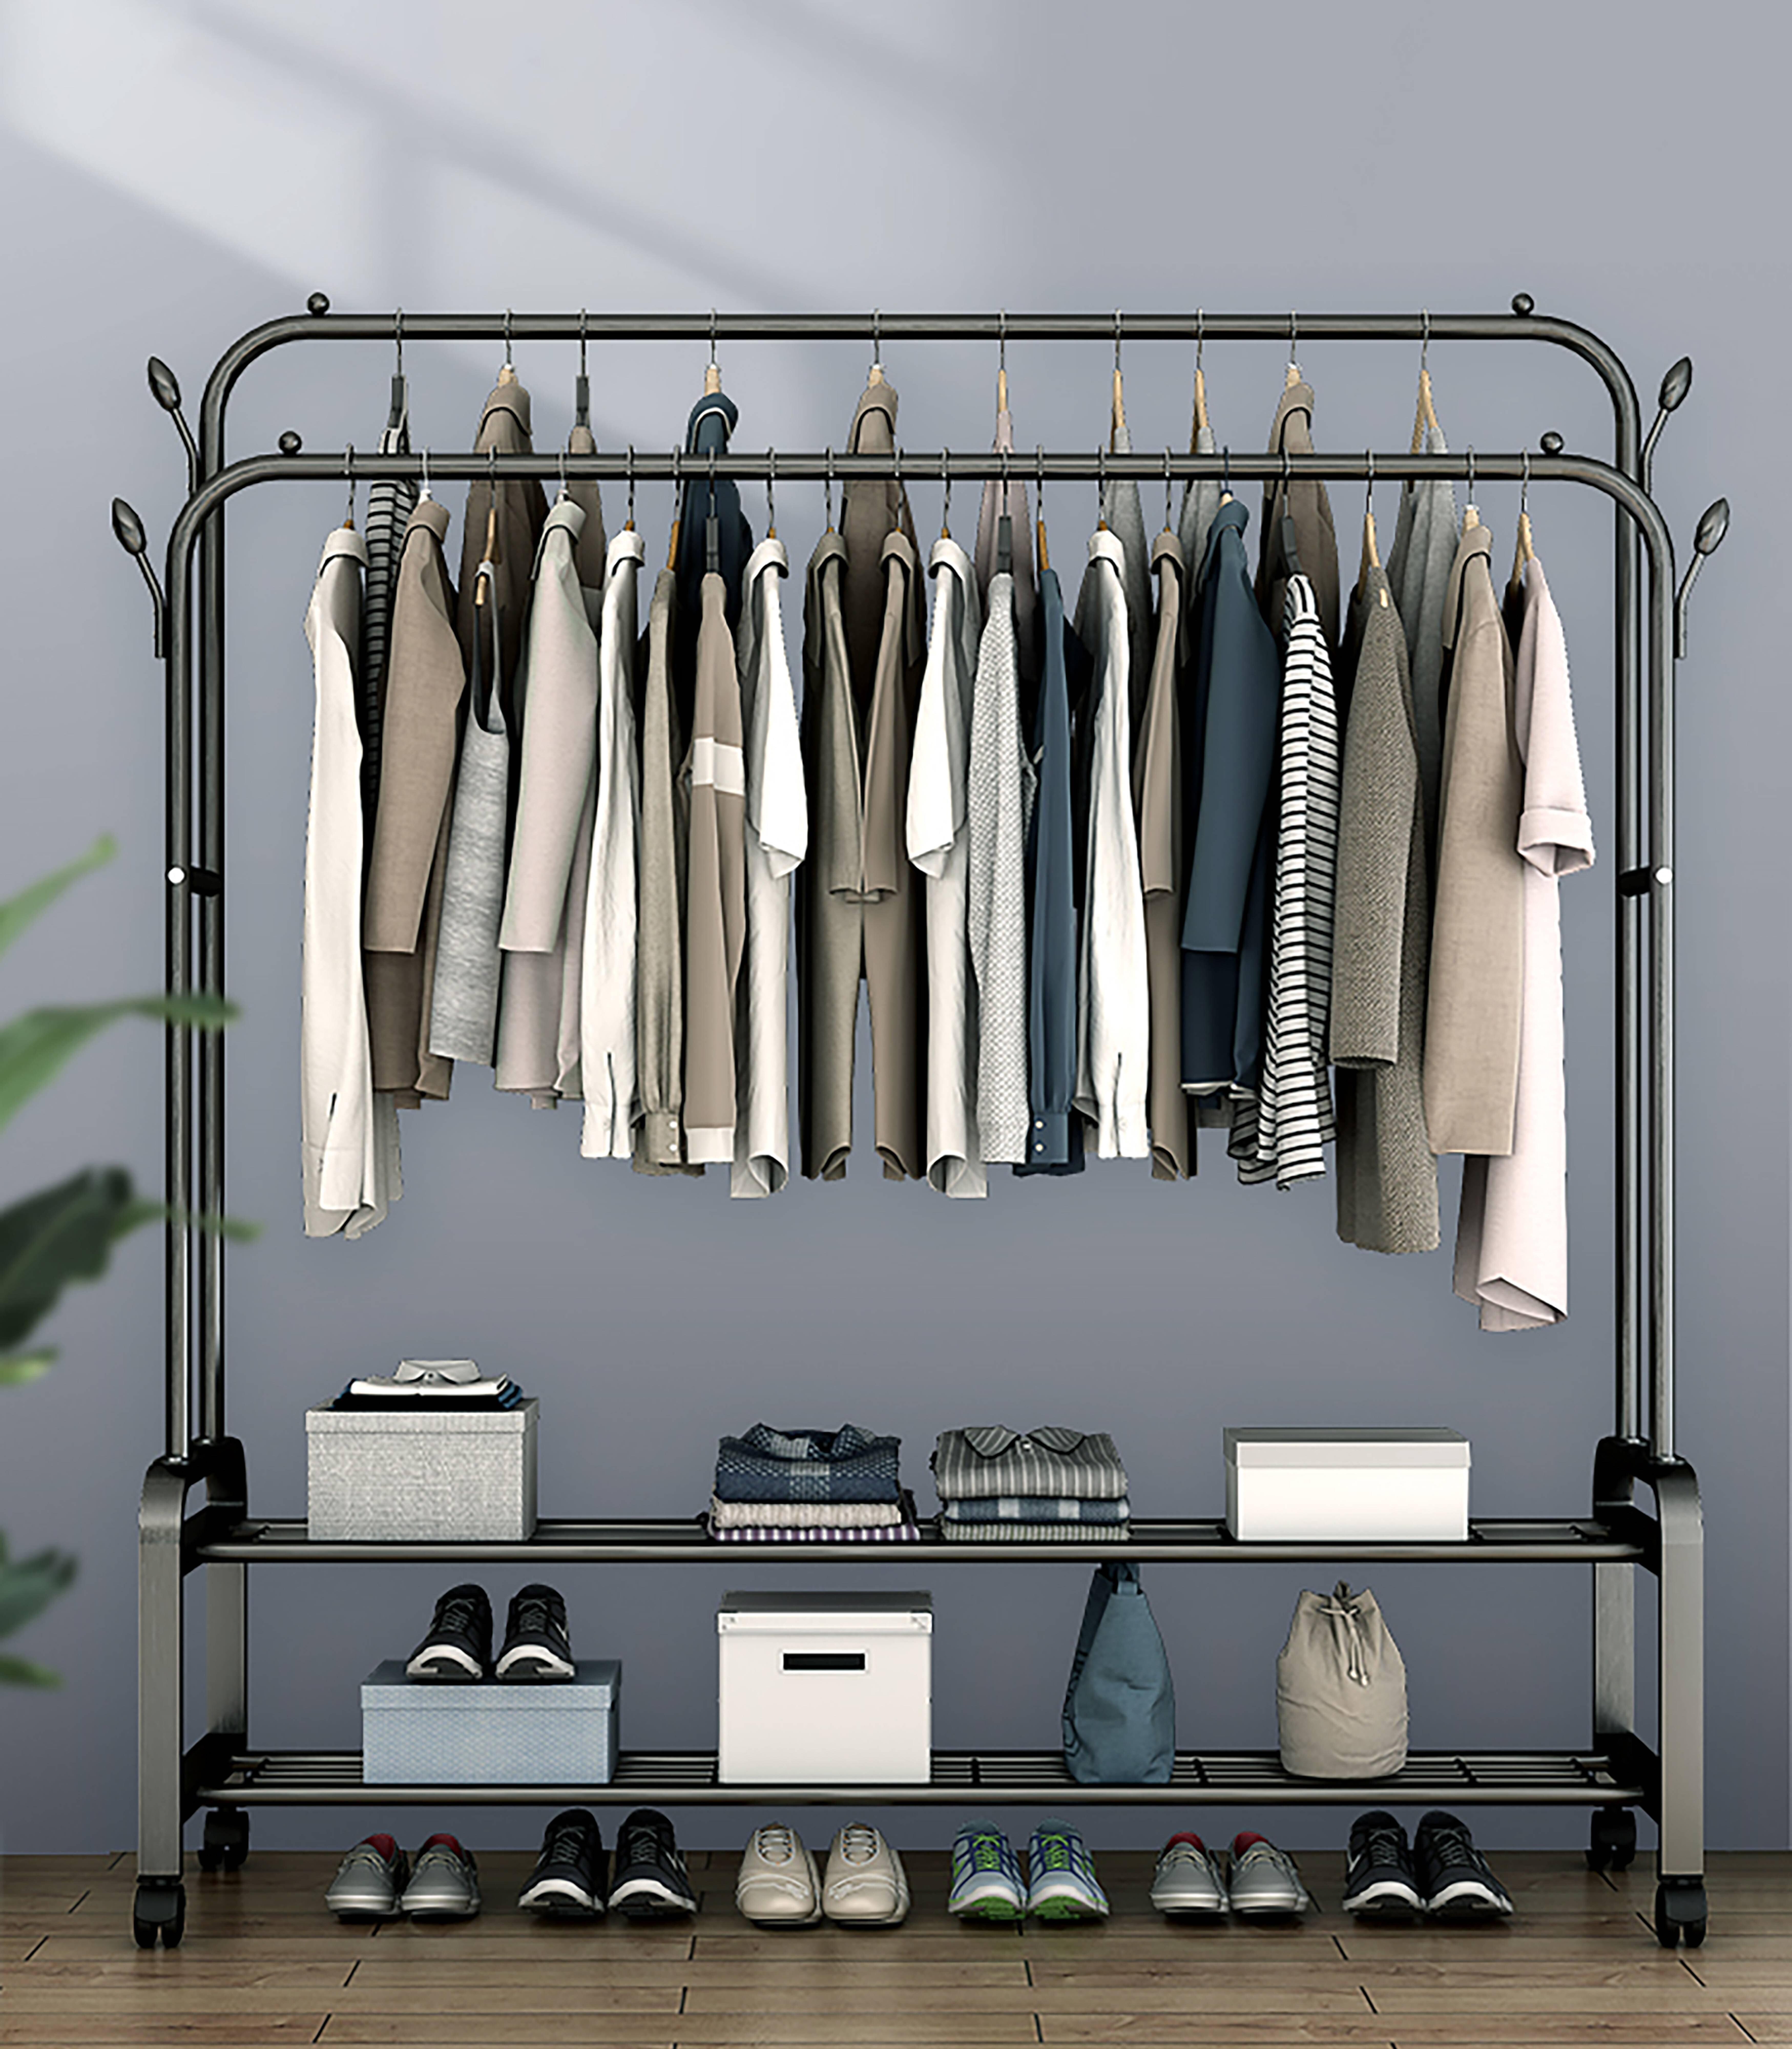 Clothes Racks Garment Wardrobes See more ideas about aesthetic clothes, clothes, fashion. wayfair com